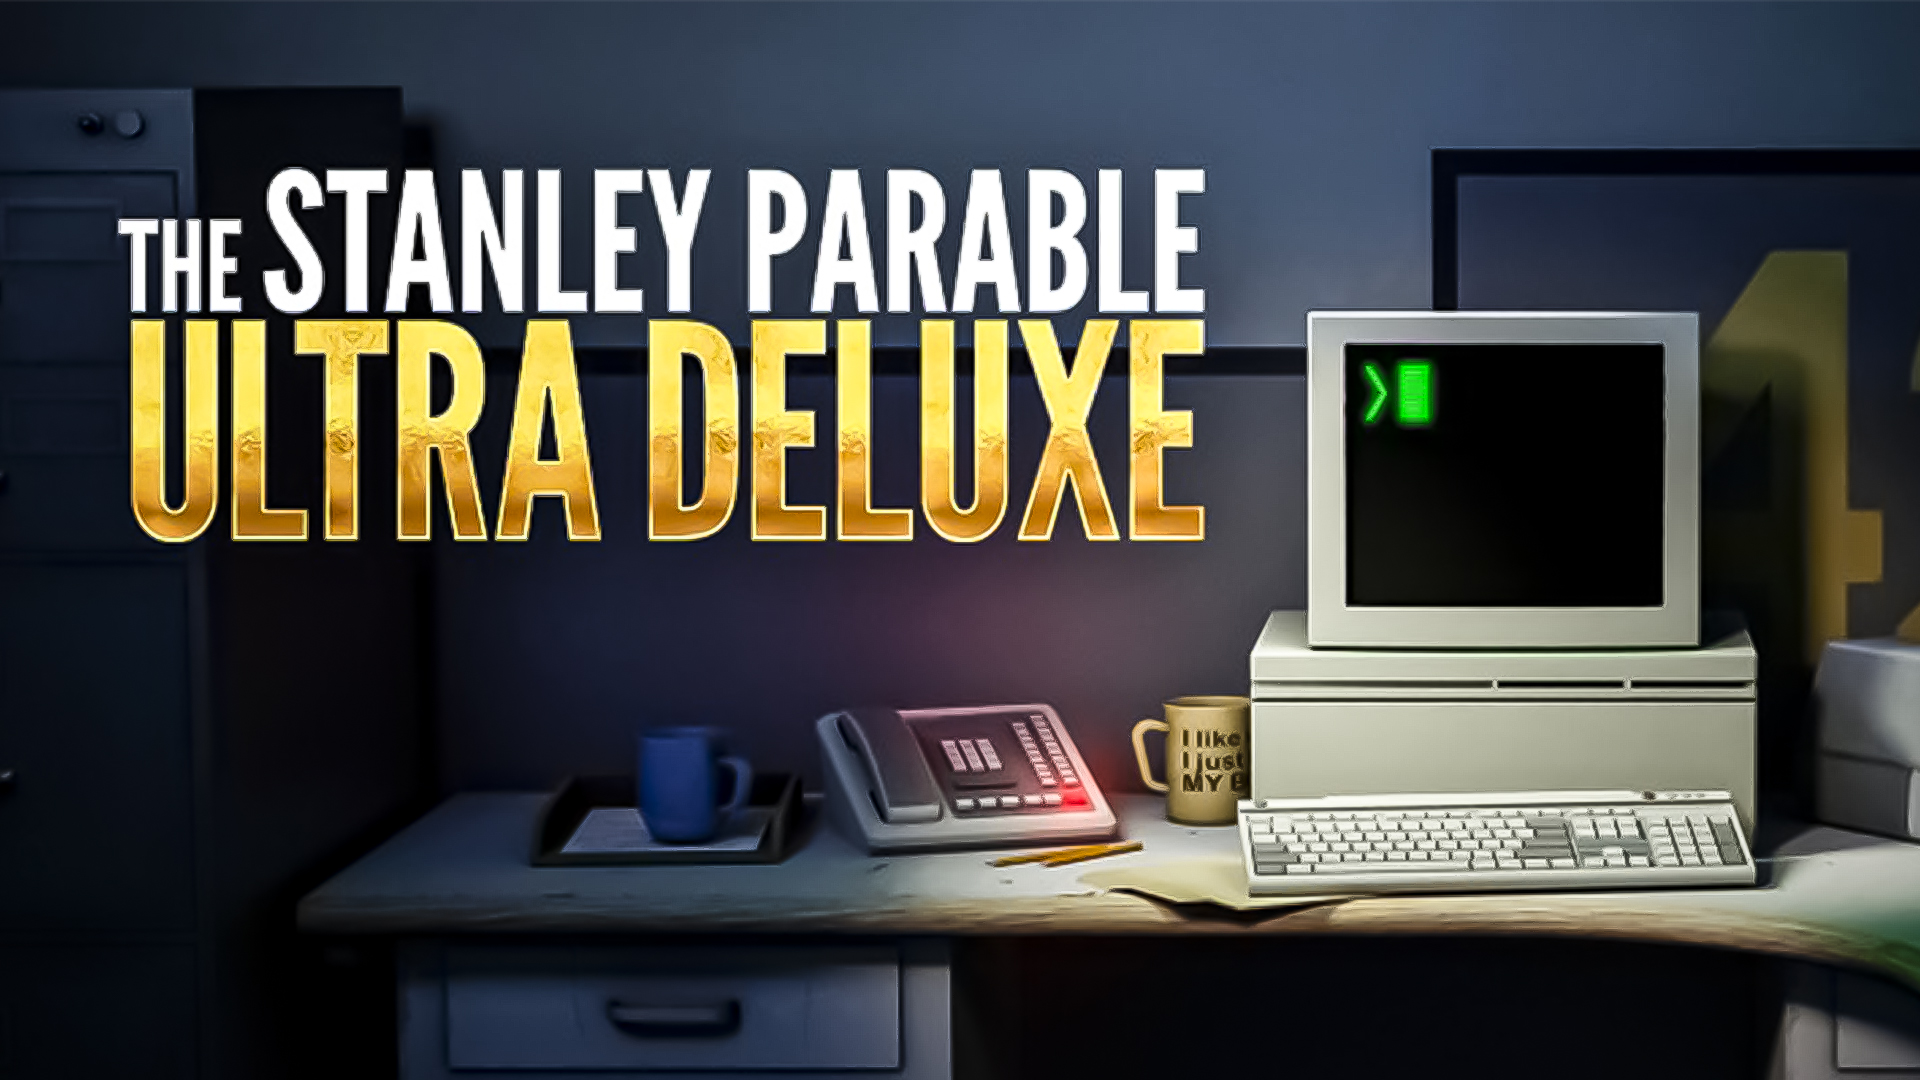 The Stanley Parable Ultra Deluxe 